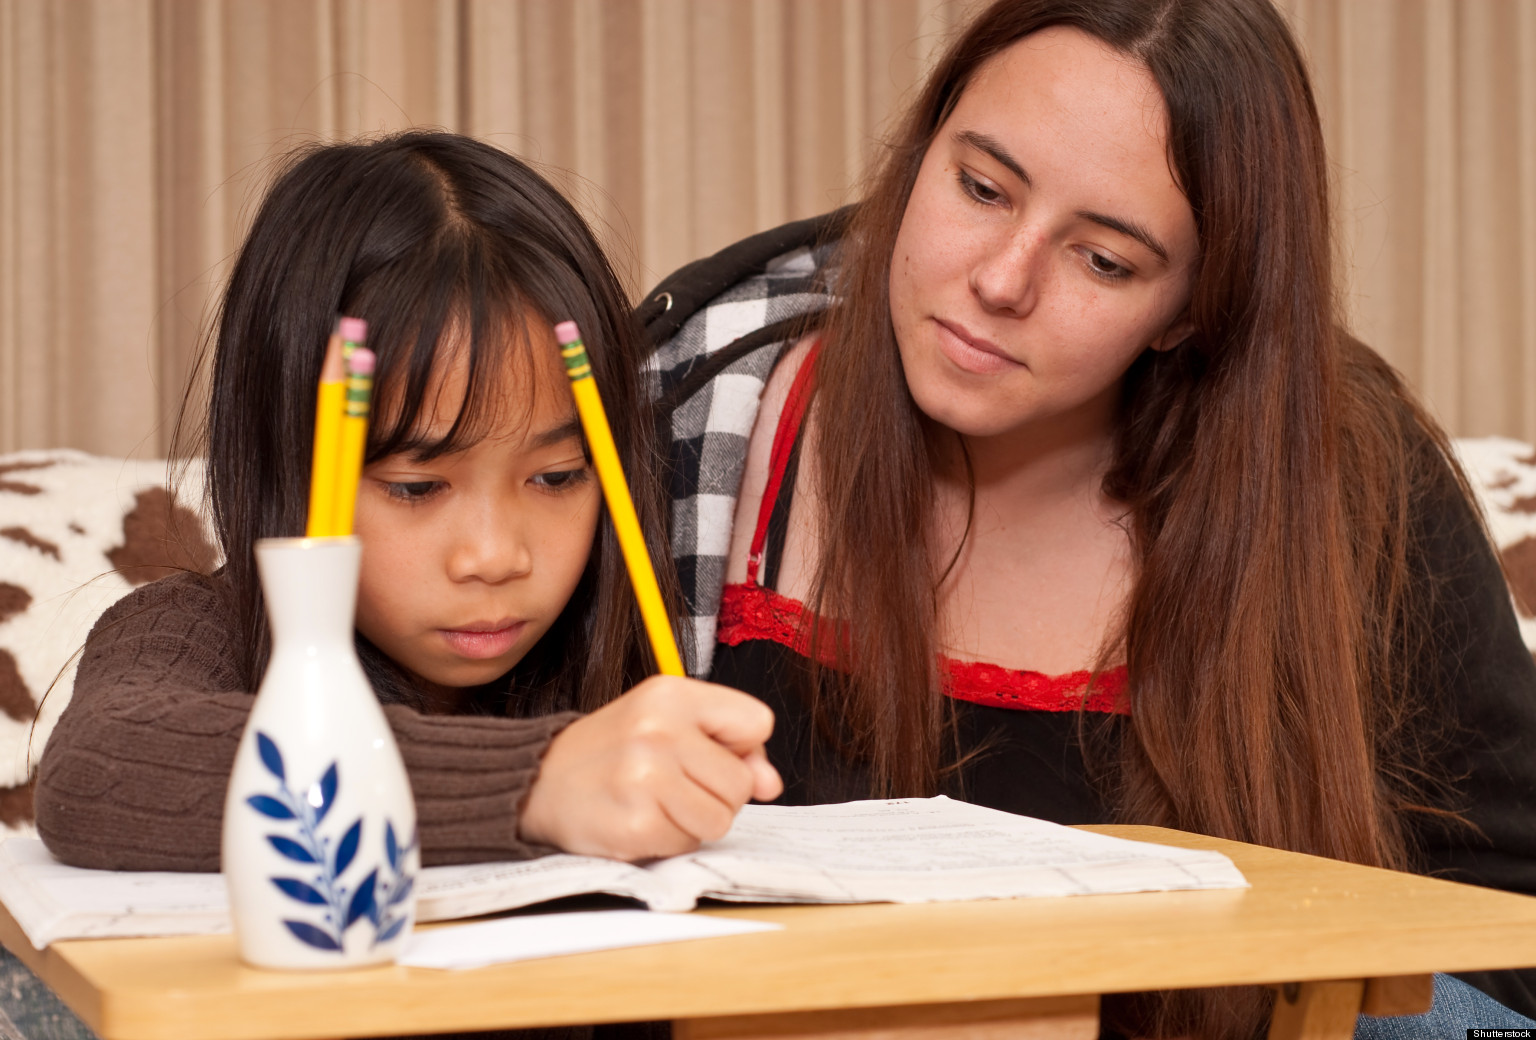 math-tutoring-for-kids-study-shows-one-on-one-instruction-might-not-be-beneficial-huffpost